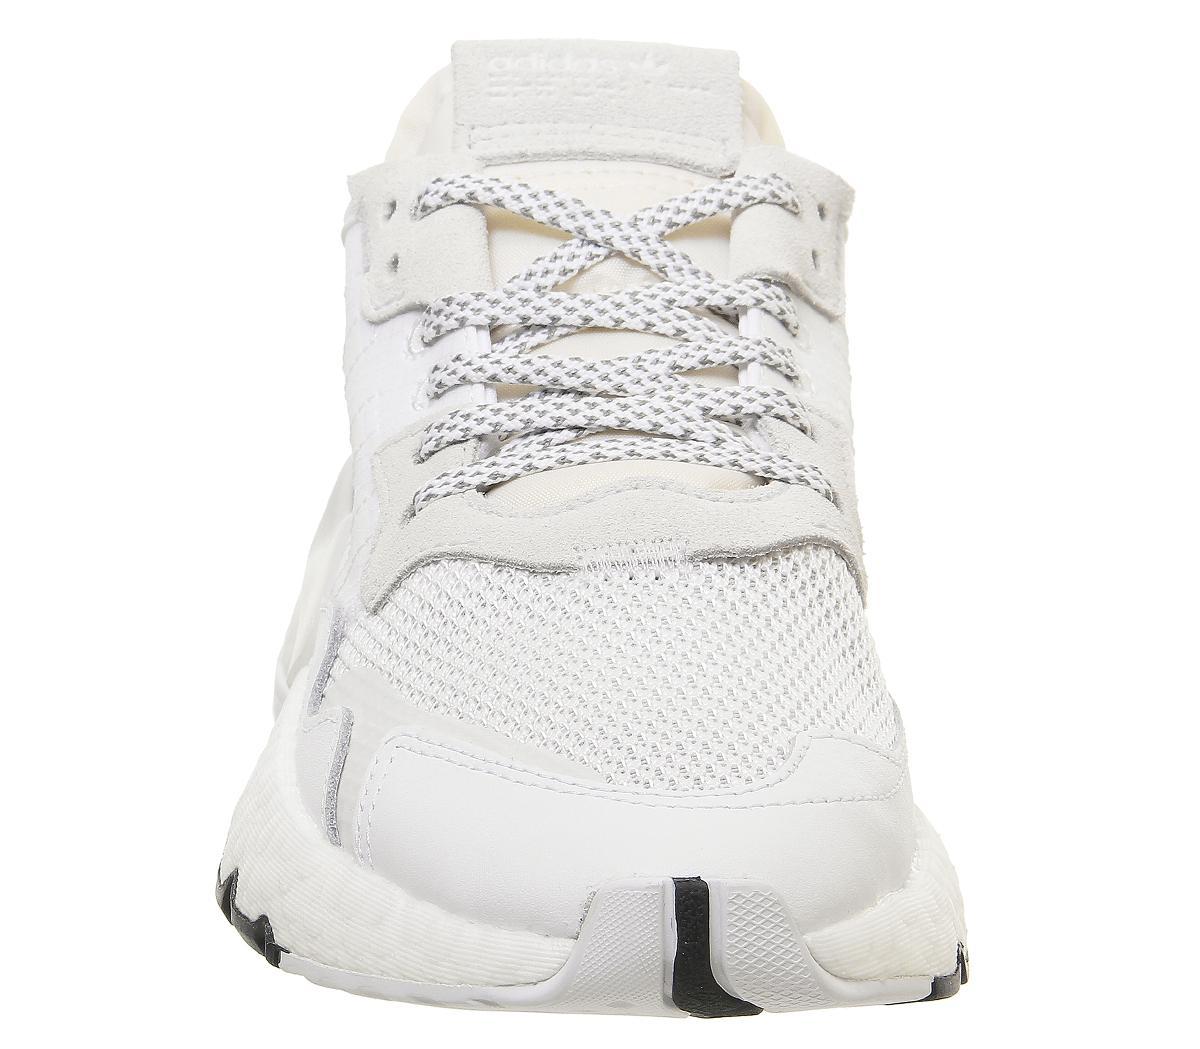 nite jogger boost trainers ftwr white crystal white